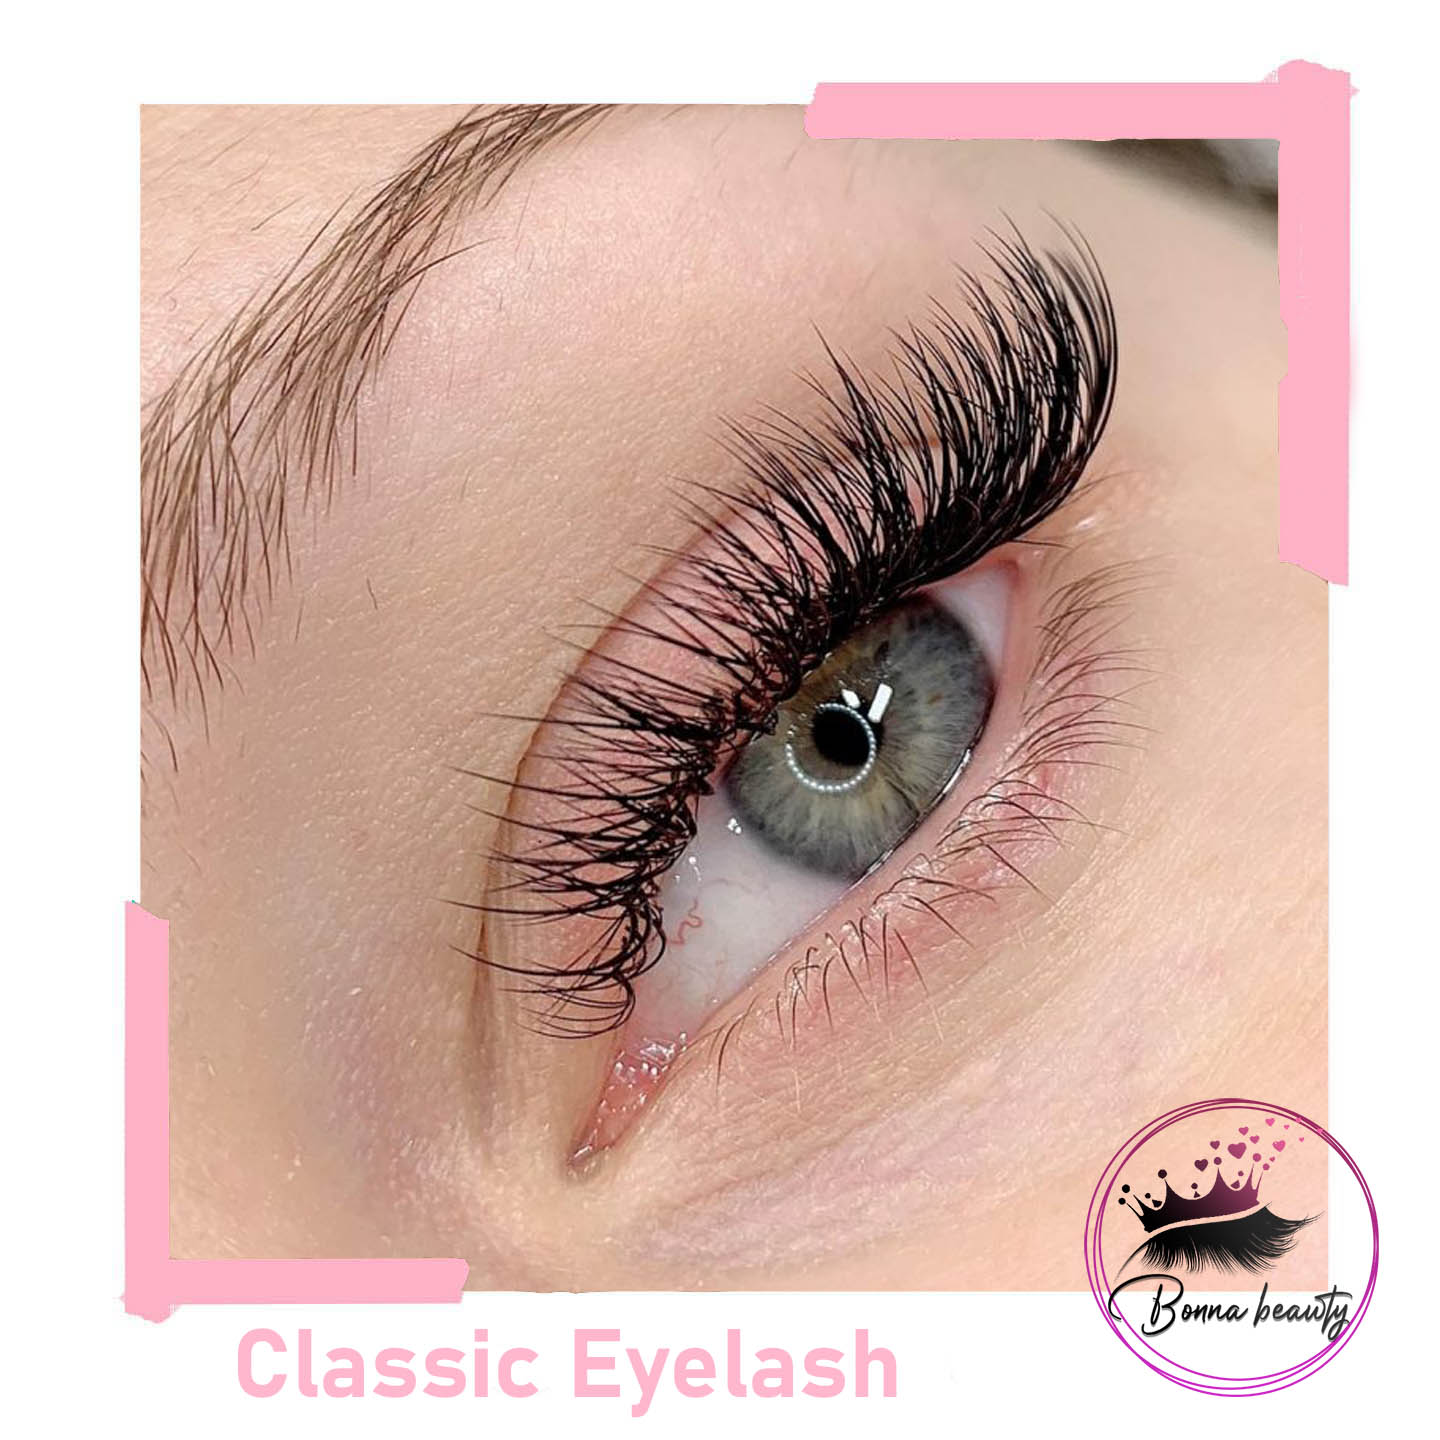 classic eyelash extension in Bankstown Sydney 5 Liverpool Liverpool